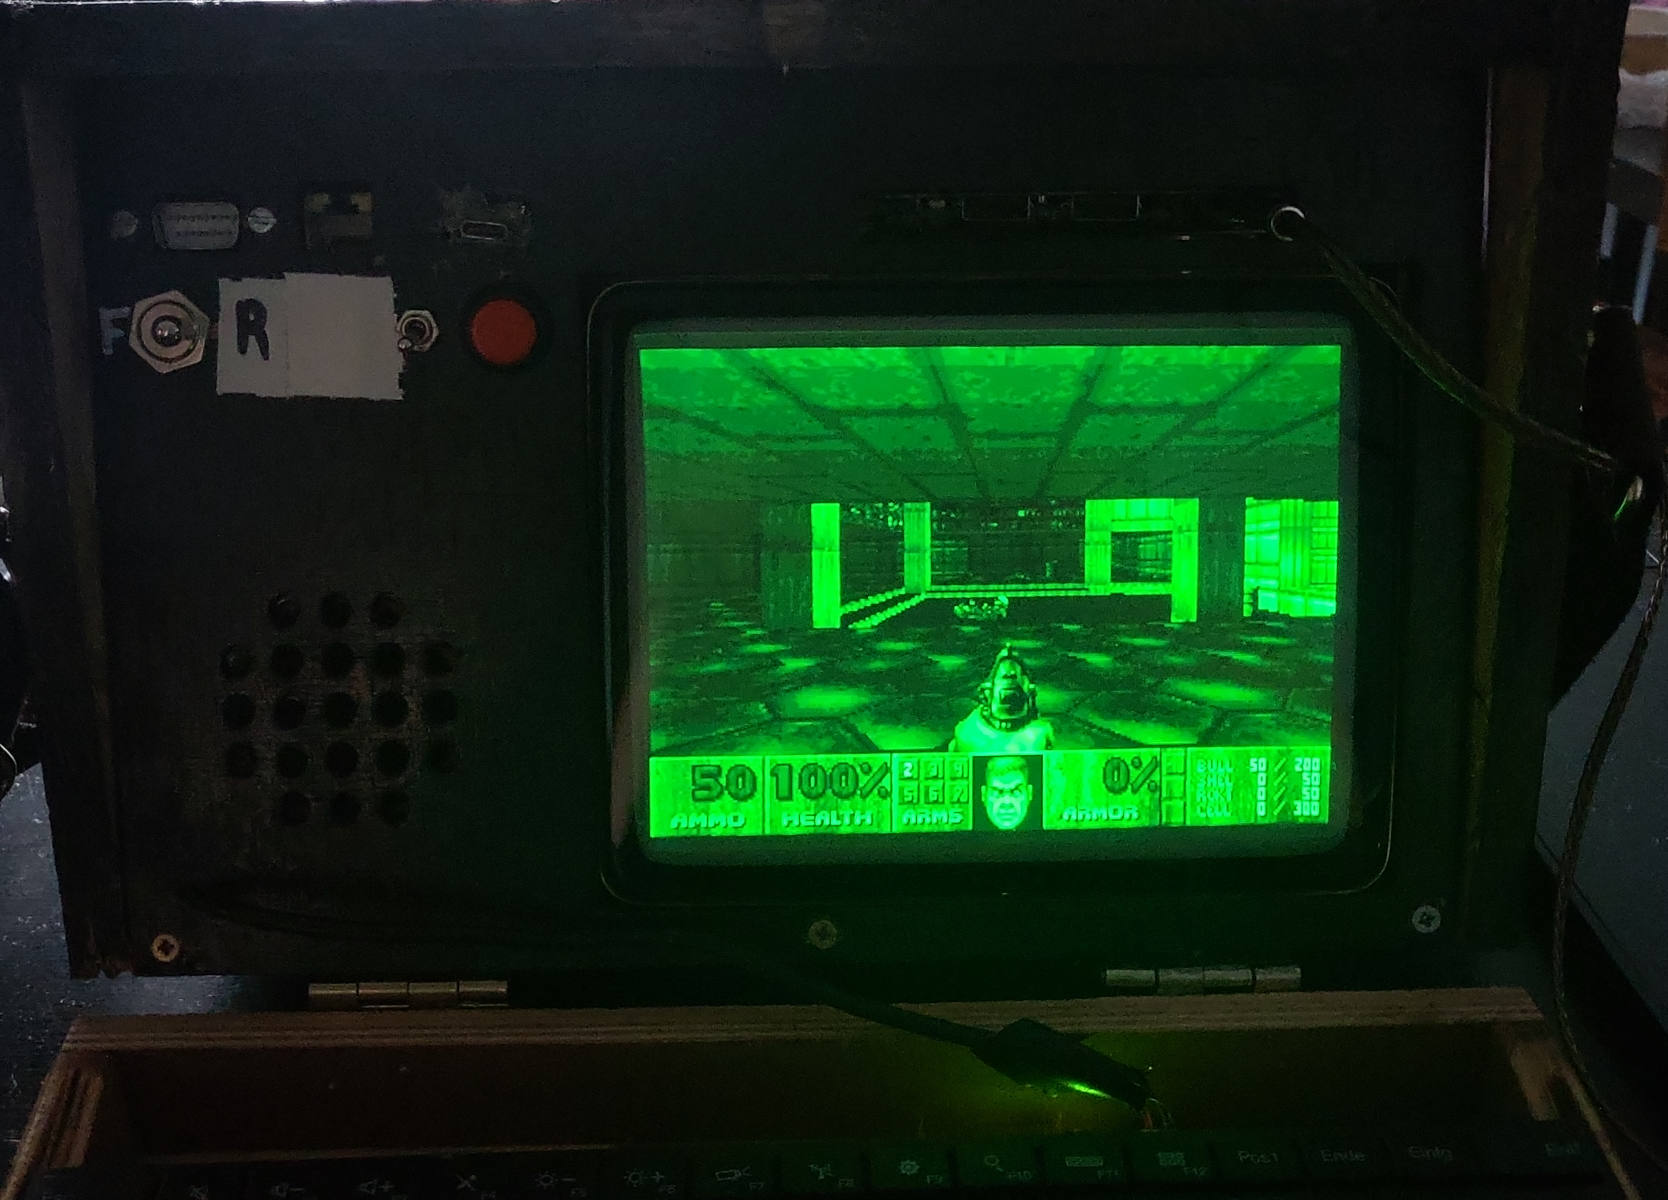 Beginning of the first map from Doom on a green CRT.